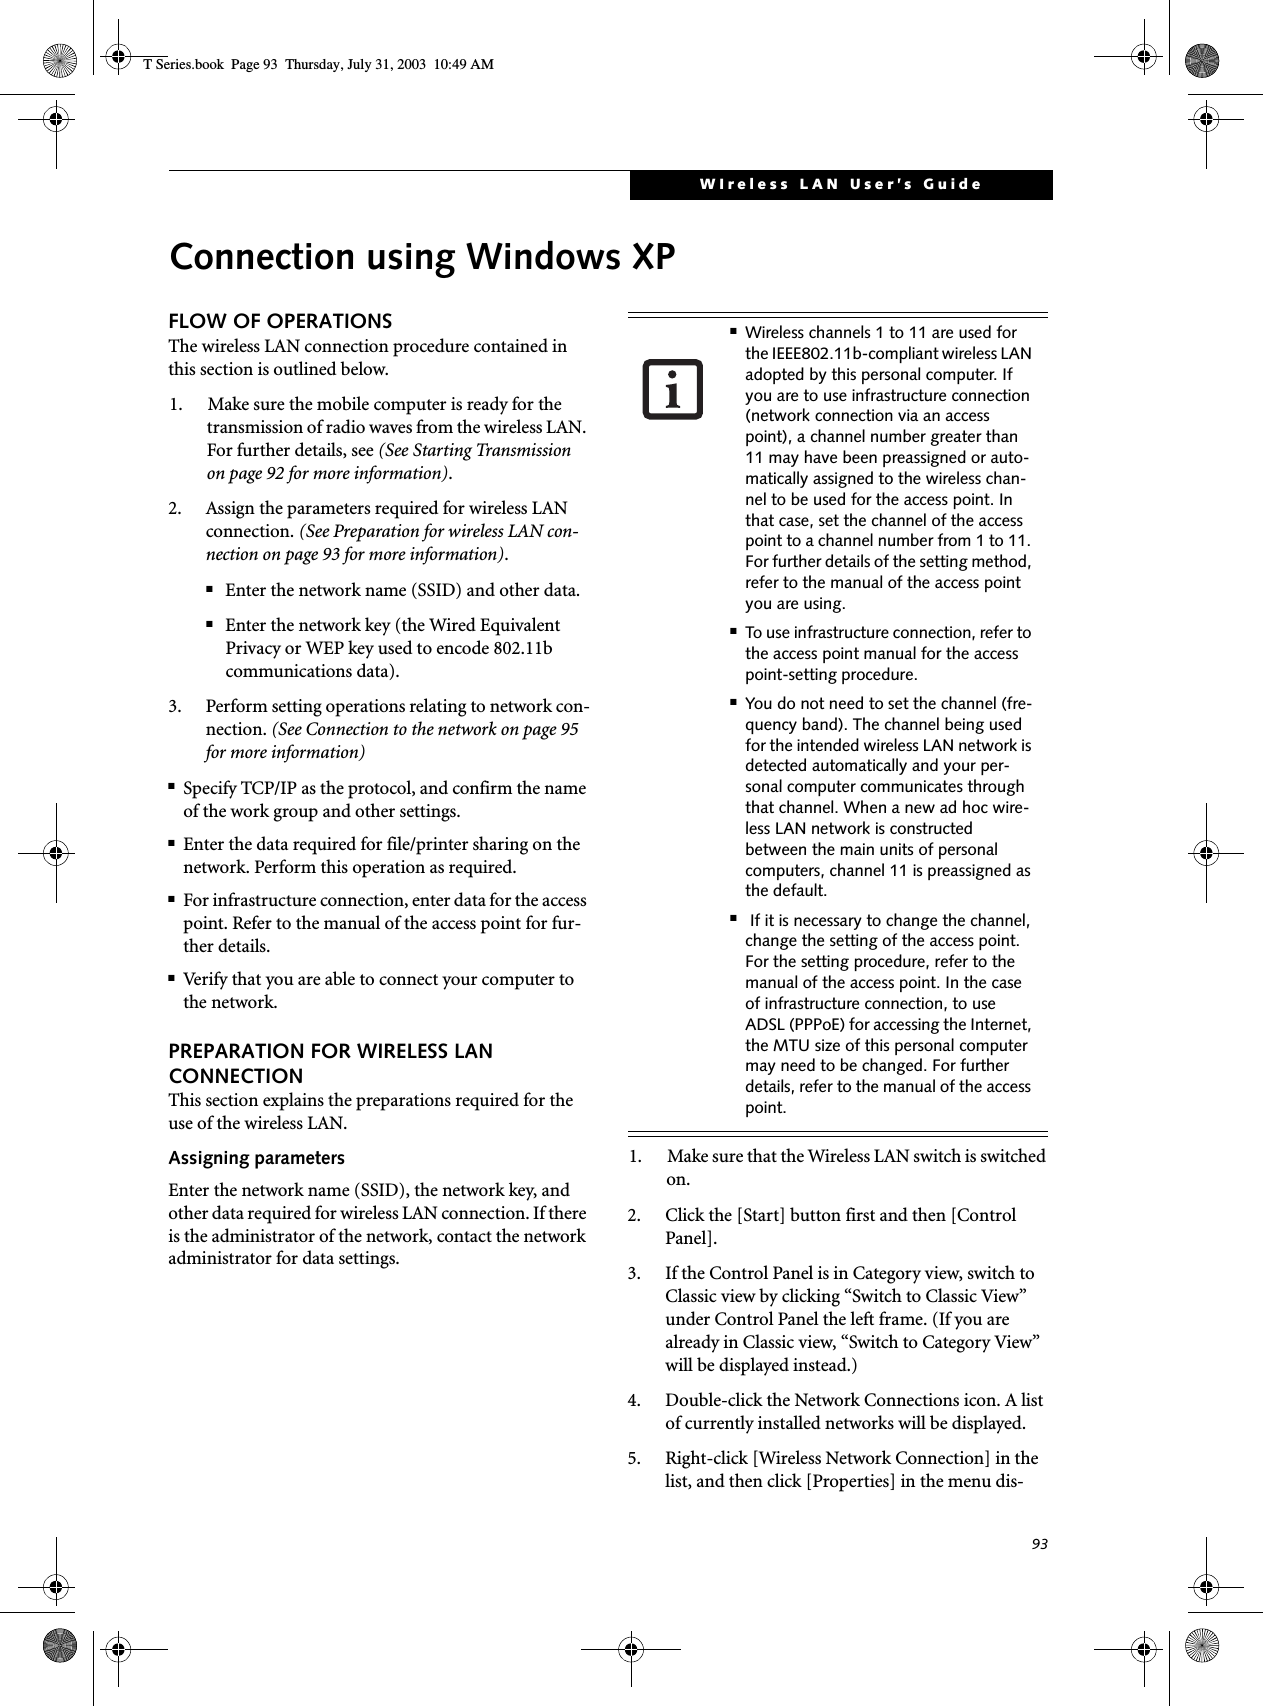 93WIreless LAN User’s GuideConnection using Windows XPFLOW OF OPERATIONSThe wireless LAN connection procedure contained in this section is outlined below.1. Make sure the mobile computer is ready for the transmission of radio waves from the wireless LAN. For further details, see (See Starting Transmission on page 92 for more information).2. Assign the parameters required for wireless LAN connection. (See Preparation for wireless LAN con-nection on page 93 for more information).■Enter the network name (SSID) and other data.■Enter the network key (the Wired Equivalent Privacy or WEP key used to encode 802.11b communications data).3. Perform setting operations relating to network con-nection. (See Connection to the network on page 95 for more information)■Specify TCP/IP as the protocol, and confirm the name of the work group and other settings.■Enter the data required for file/printer sharing on the network. Perform this operation as required.■For infrastructure connection, enter data for the access point. Refer to the manual of the access point for fur-ther details.■Verify that you are able to connect your computer to the network.PREPARATION FOR WIRELESS LAN CONNECTIONThis section explains the preparations required for the use of the wireless LAN.Assigning parametersEnter the network name (SSID), the network key, and other data required for wireless LAN connection. If there is the administrator of the network, contact the network administrator for data settings.1. Make sure that the Wireless LAN switch is switched on.2. Click the [Start] button first and then [Control Panel].3. If the Control Panel is in Category view, switch to Classic view by clicking “Switch to Classic View” under Control Panel the left frame. (If you are already in Classic view, “Switch to Category View” will be displayed instead.) 4. Double-click the Network Connections icon. A list of currently installed networks will be displayed.5. Right-click [Wireless Network Connection] in the list, and then click [Properties] in the menu dis-■Wireless channels 1 to 11 are used for the IEEE802.11b-compliant wireless LAN adopted by this personal computer. If you are to use infrastructure connection (network connection via an access point), a channel number greater than 11 may have been preassigned or auto-matically assigned to the wireless chan-nel to be used for the access point. In that case, set the channel of the access point to a channel number from 1 to 11. For further details of the setting method, refer to the manual of the access point you are using.■To use infrastructure connection, refer to the access point manual for the access point-setting procedure.■You do not need to set the channel (fre-quency band). The channel being used for the intended wireless LAN network is detected automatically and your per-sonal computer communicates through that channel. When a new ad hoc wire-less LAN network is constructed between the main units of personal computers, channel 11 is preassigned as the default.■ If it is necessary to change the channel, change the setting of the access point. For the setting procedure, refer to the manual of the access point. In the case of infrastructure connection, to use ADSL (PPPoE) for accessing the Internet, the MTU size of this personal computer may need to be changed. For further details, refer to the manual of the access point.T Series.book  Page 93  Thursday, July 31, 2003  10:49 AM